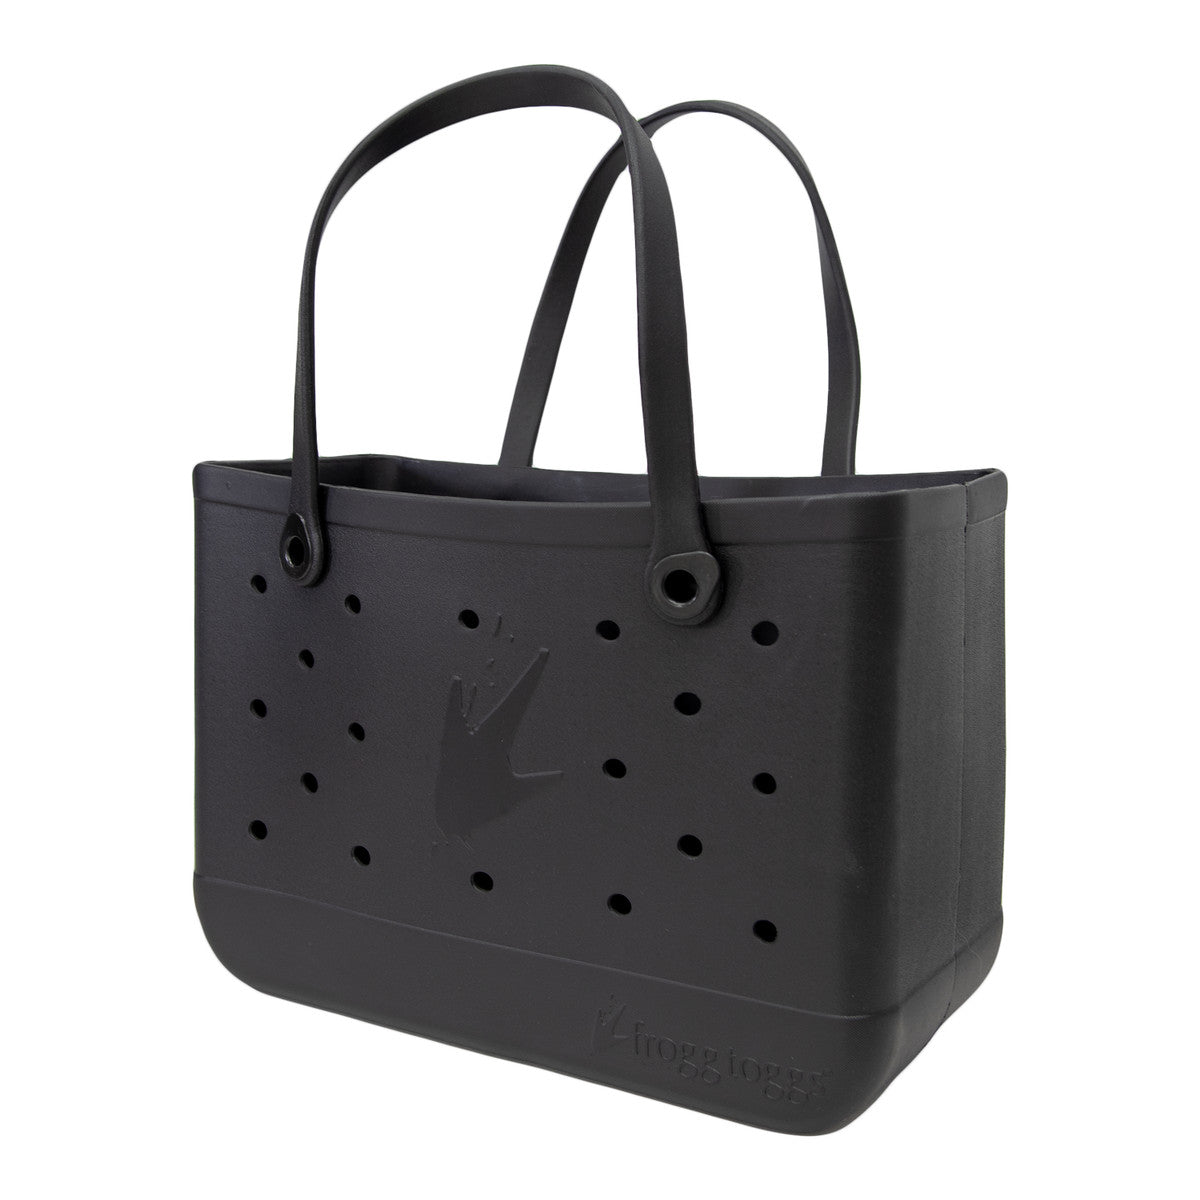 Frogg Toggs Tote I Large